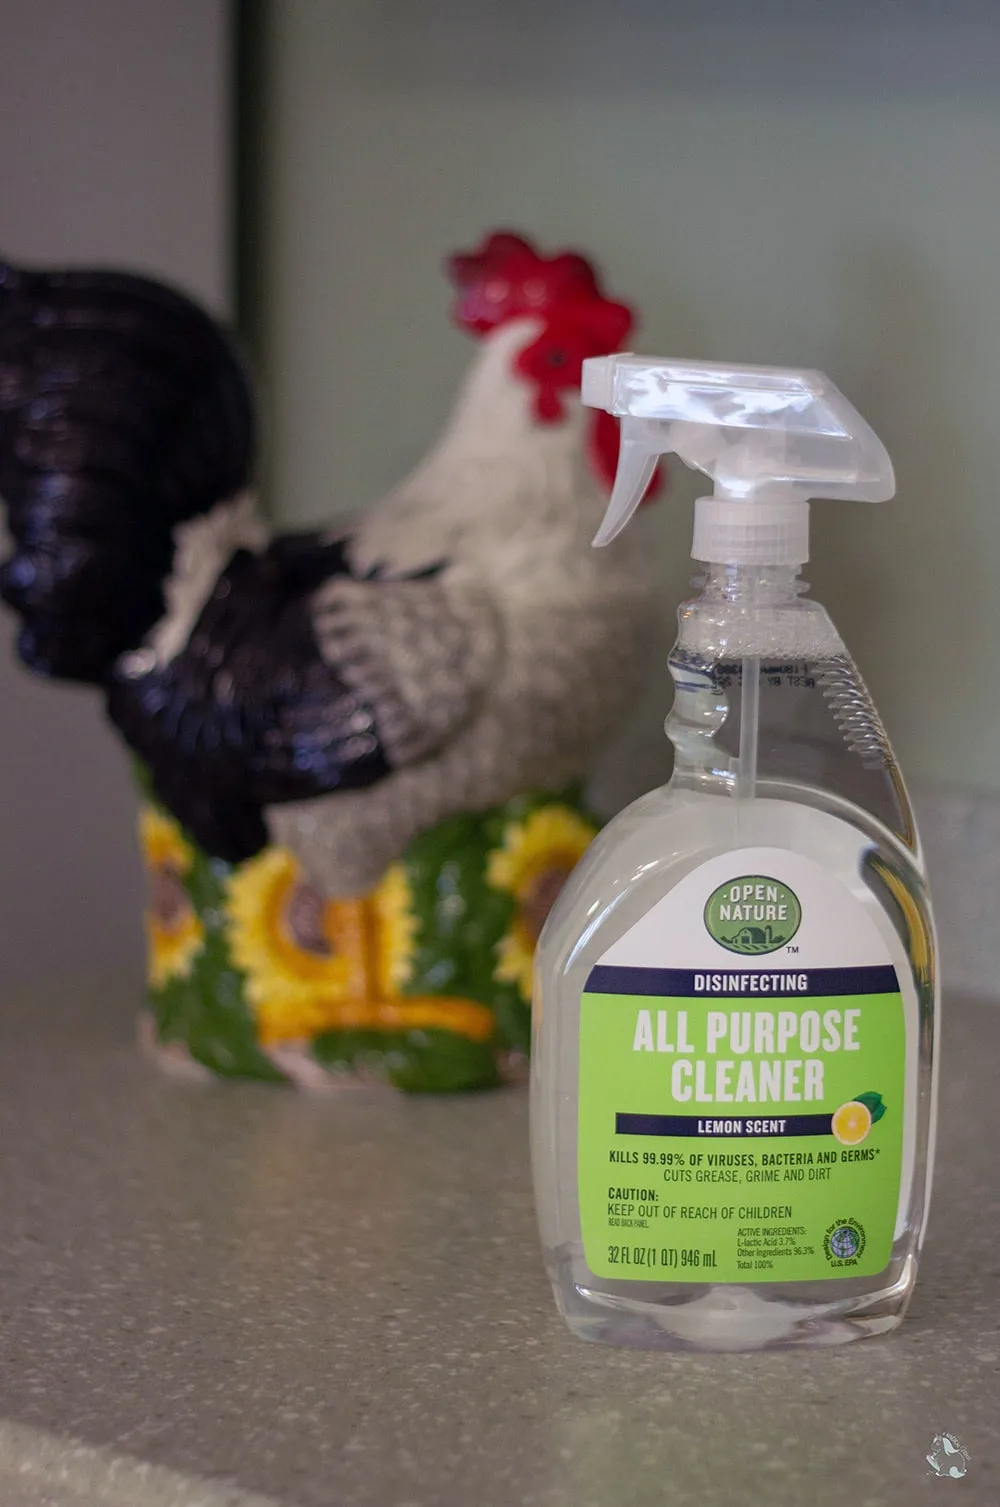 Open Nature all purpose cleaner